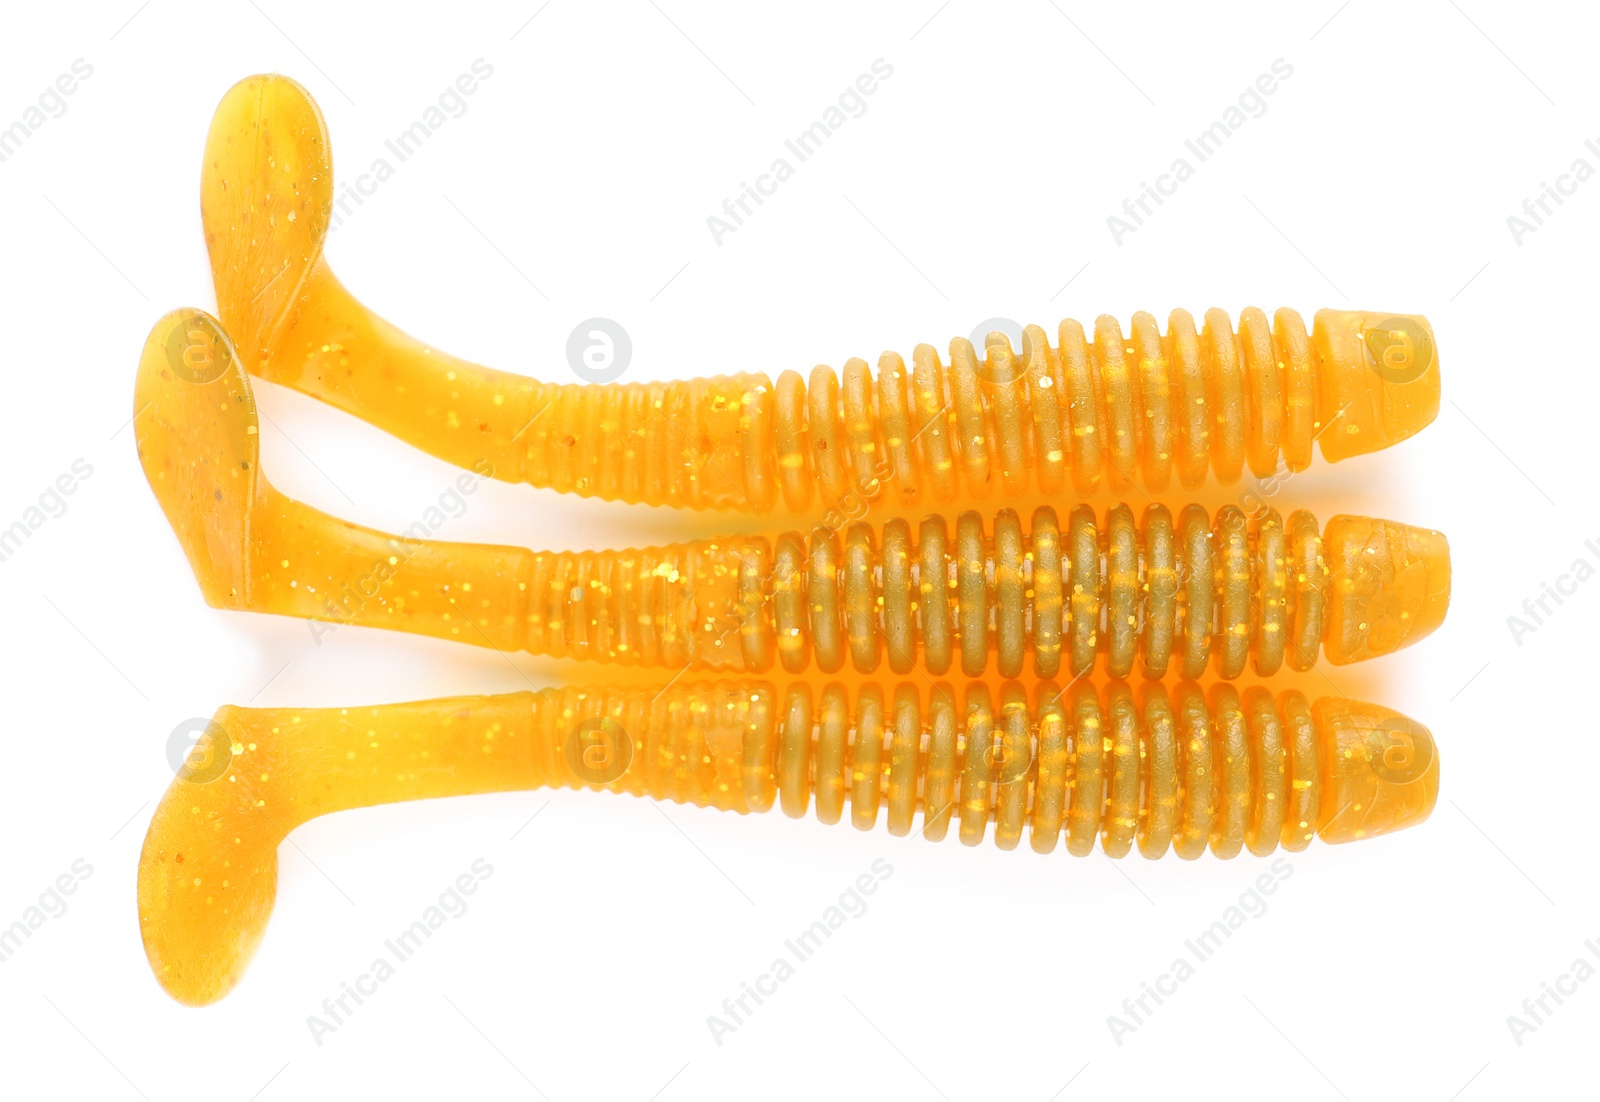 Photo of Rubber worms on white background, top view. Fishing lure